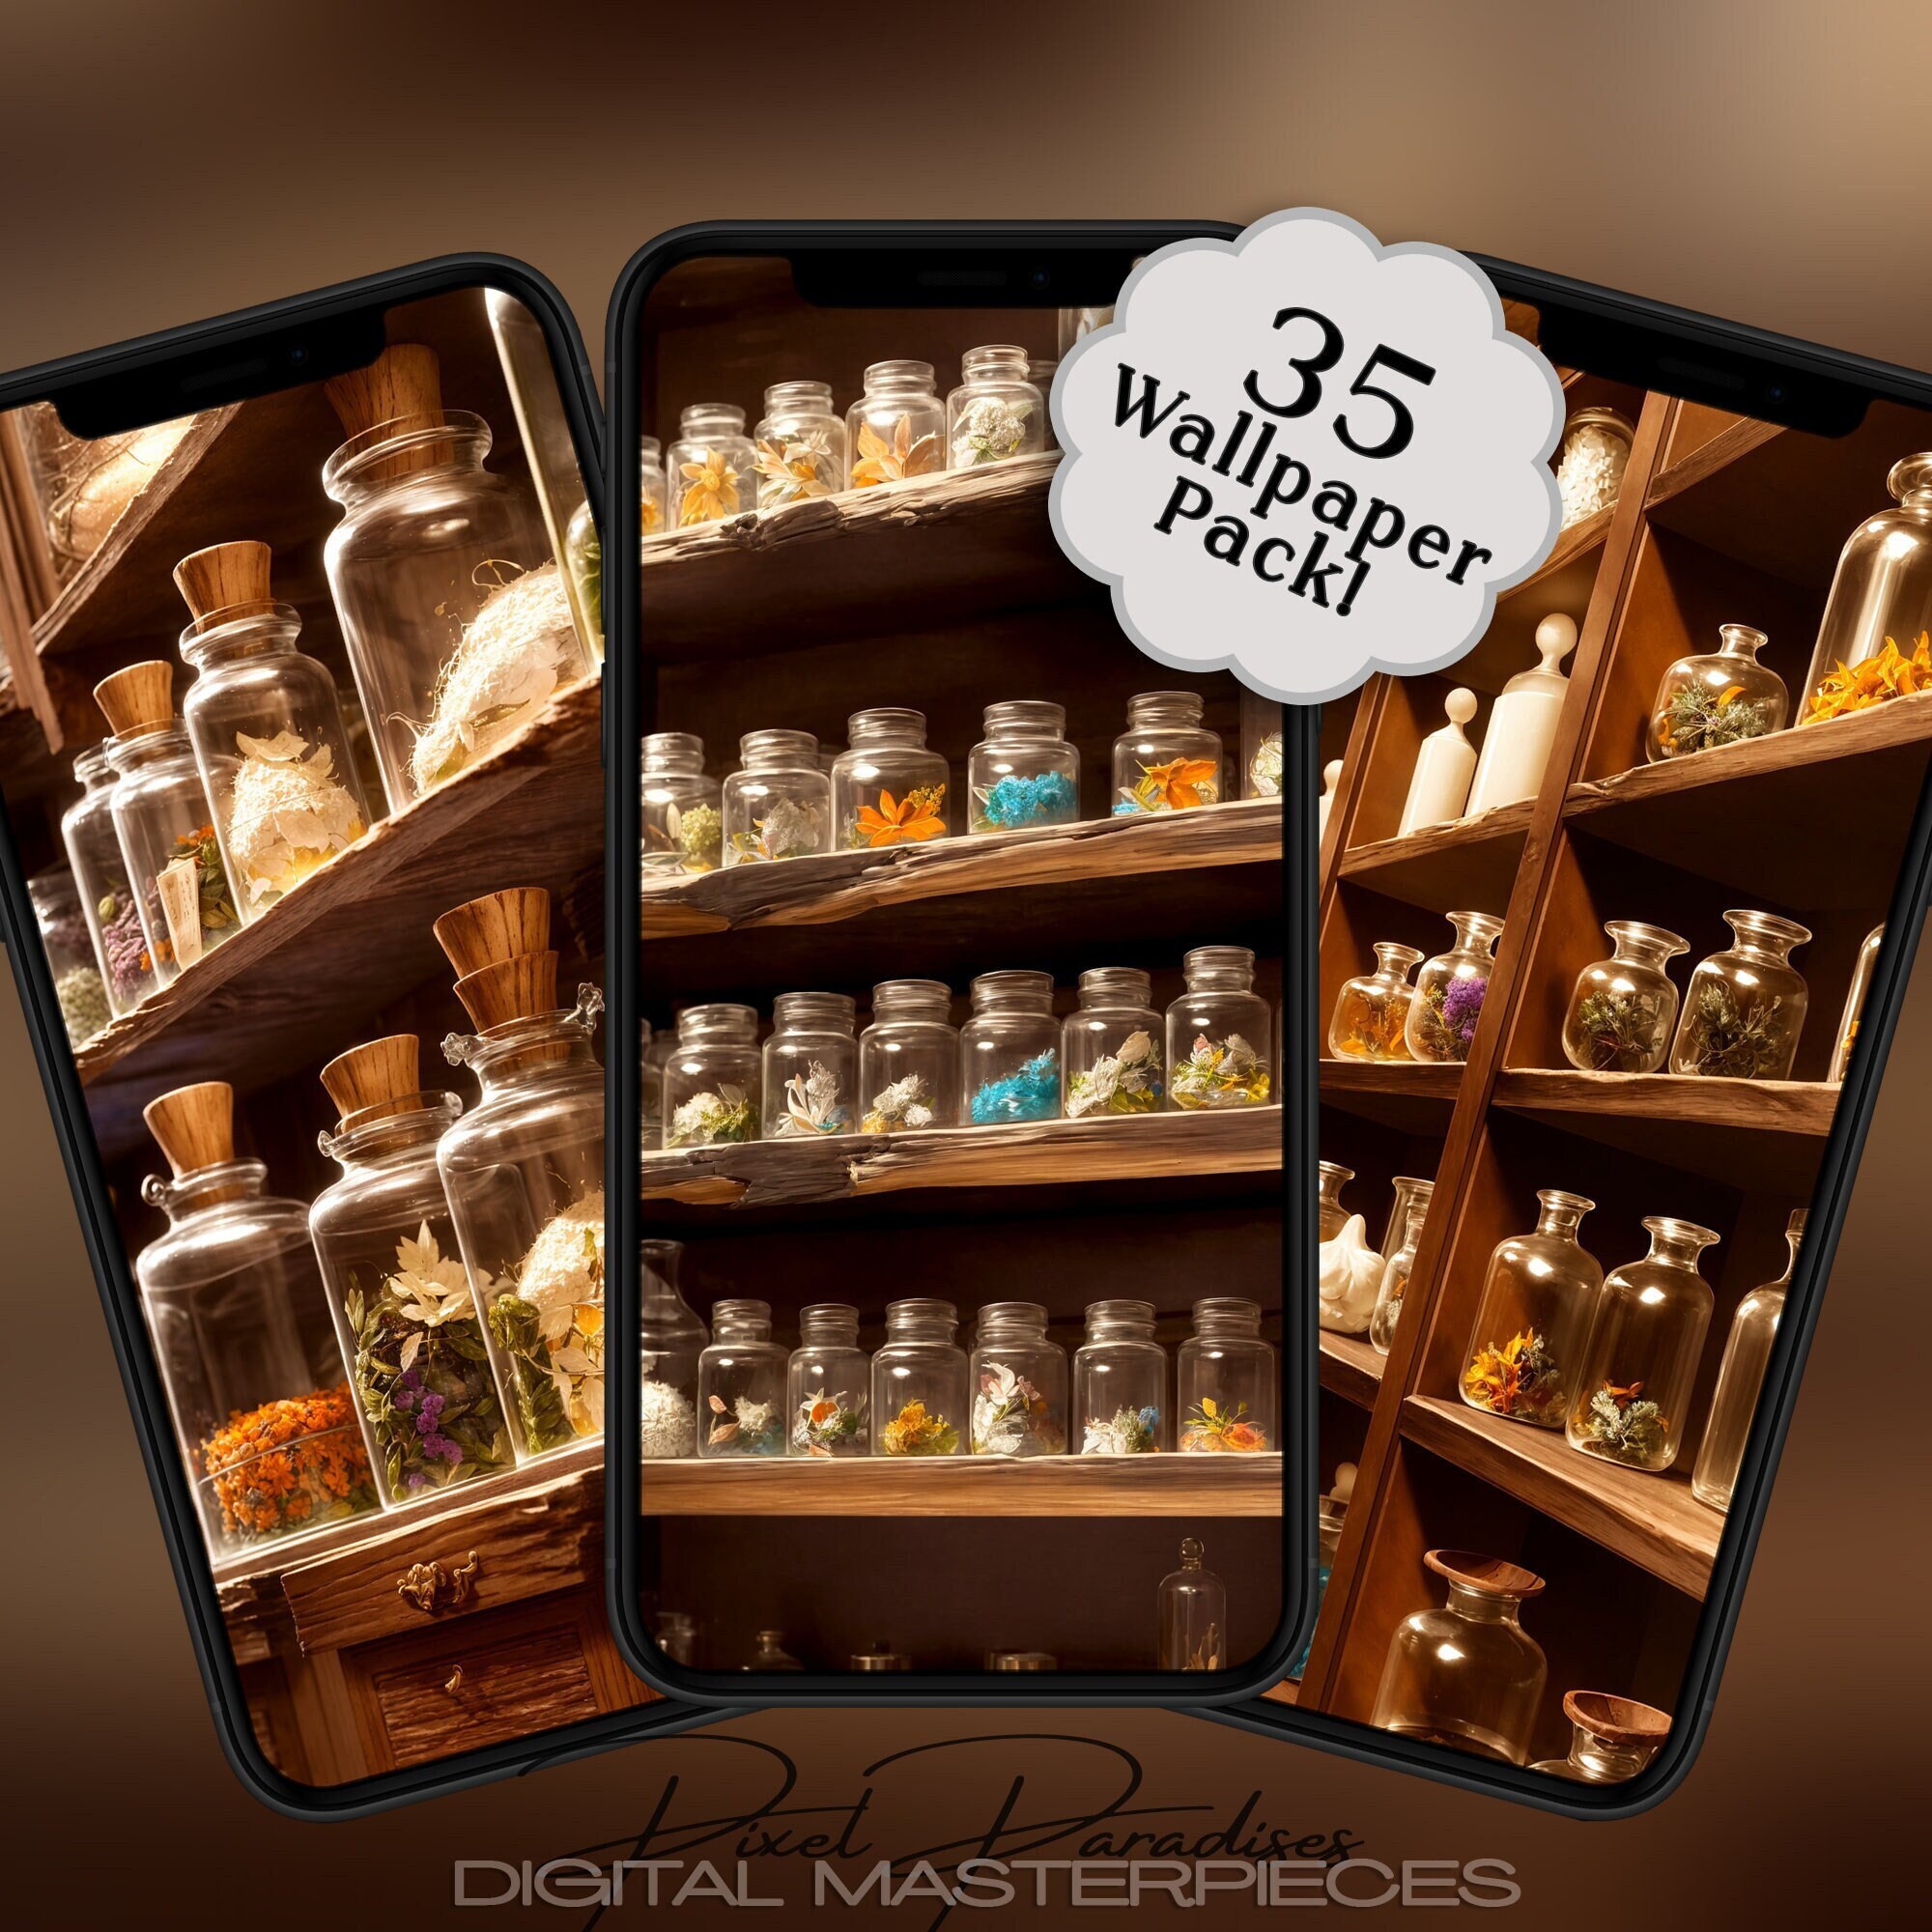 500 Apothecary Pictures HD  Download Free Images on Unsplash